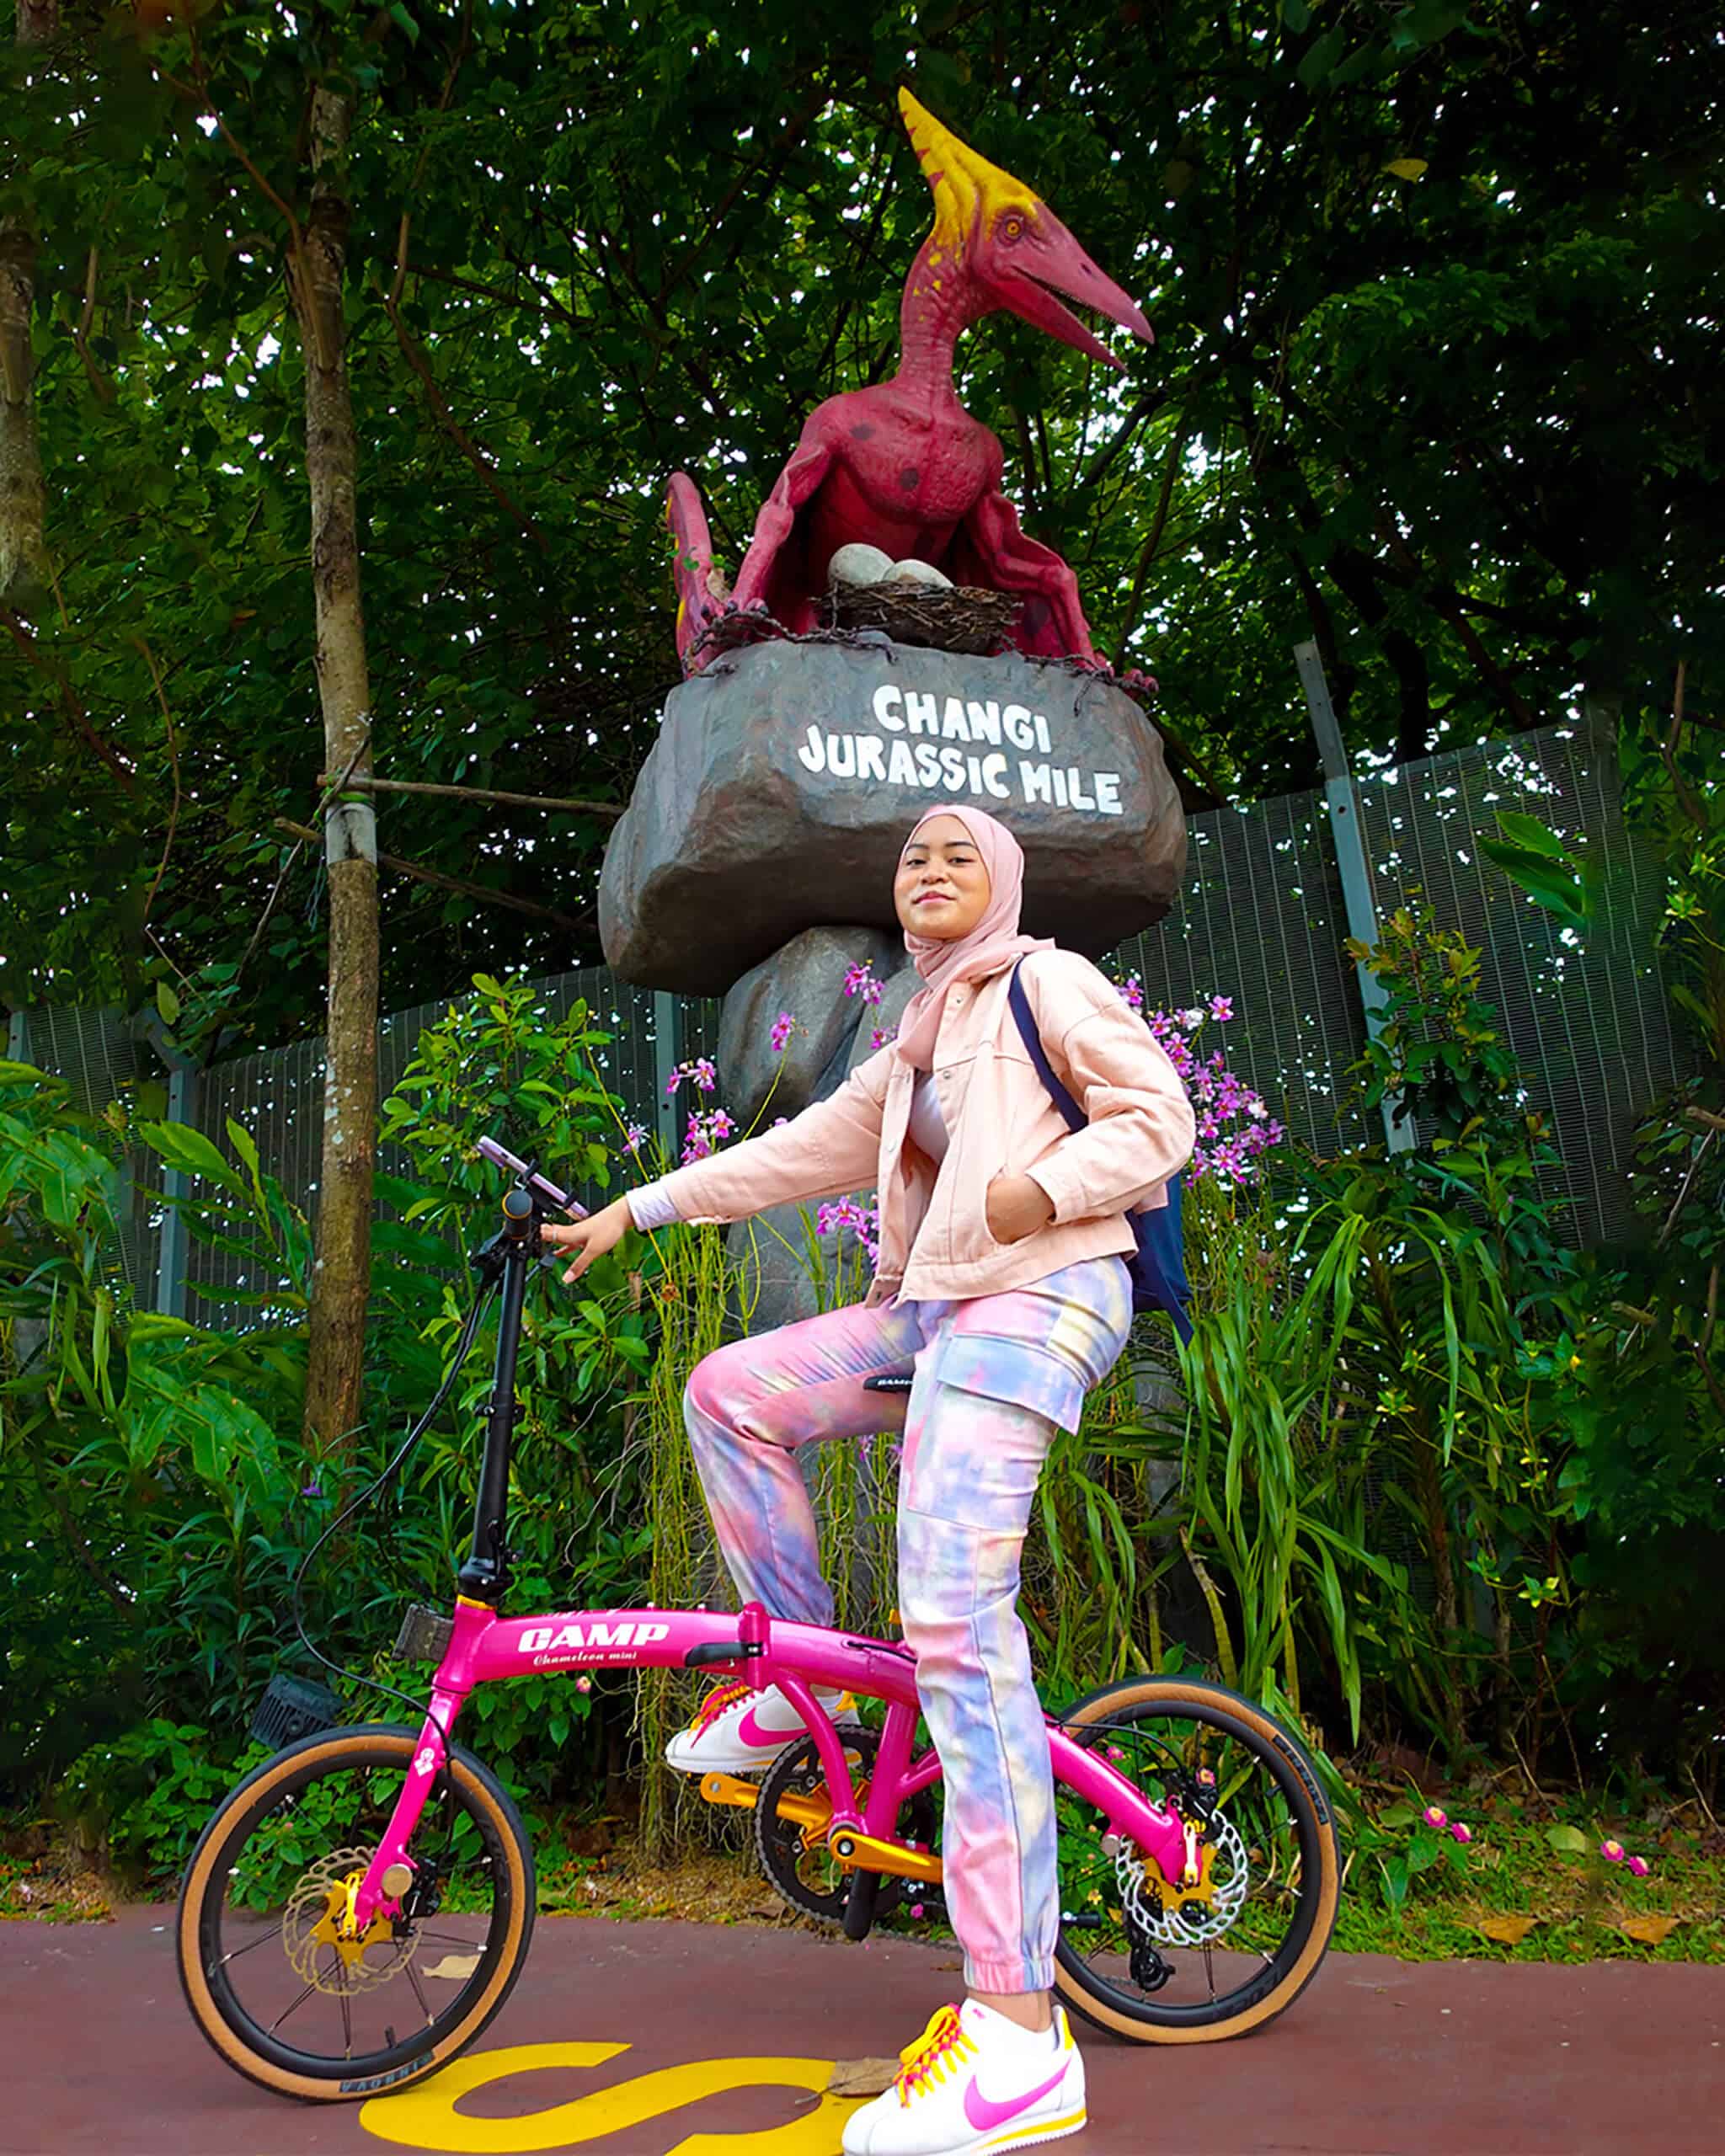 CAMP Chameleon Mini 2022 PINK foldable bicycle with Jamie at Jurassic Mile - Top 8 Cycling Routes On A Foldable Bicycle In Singapore